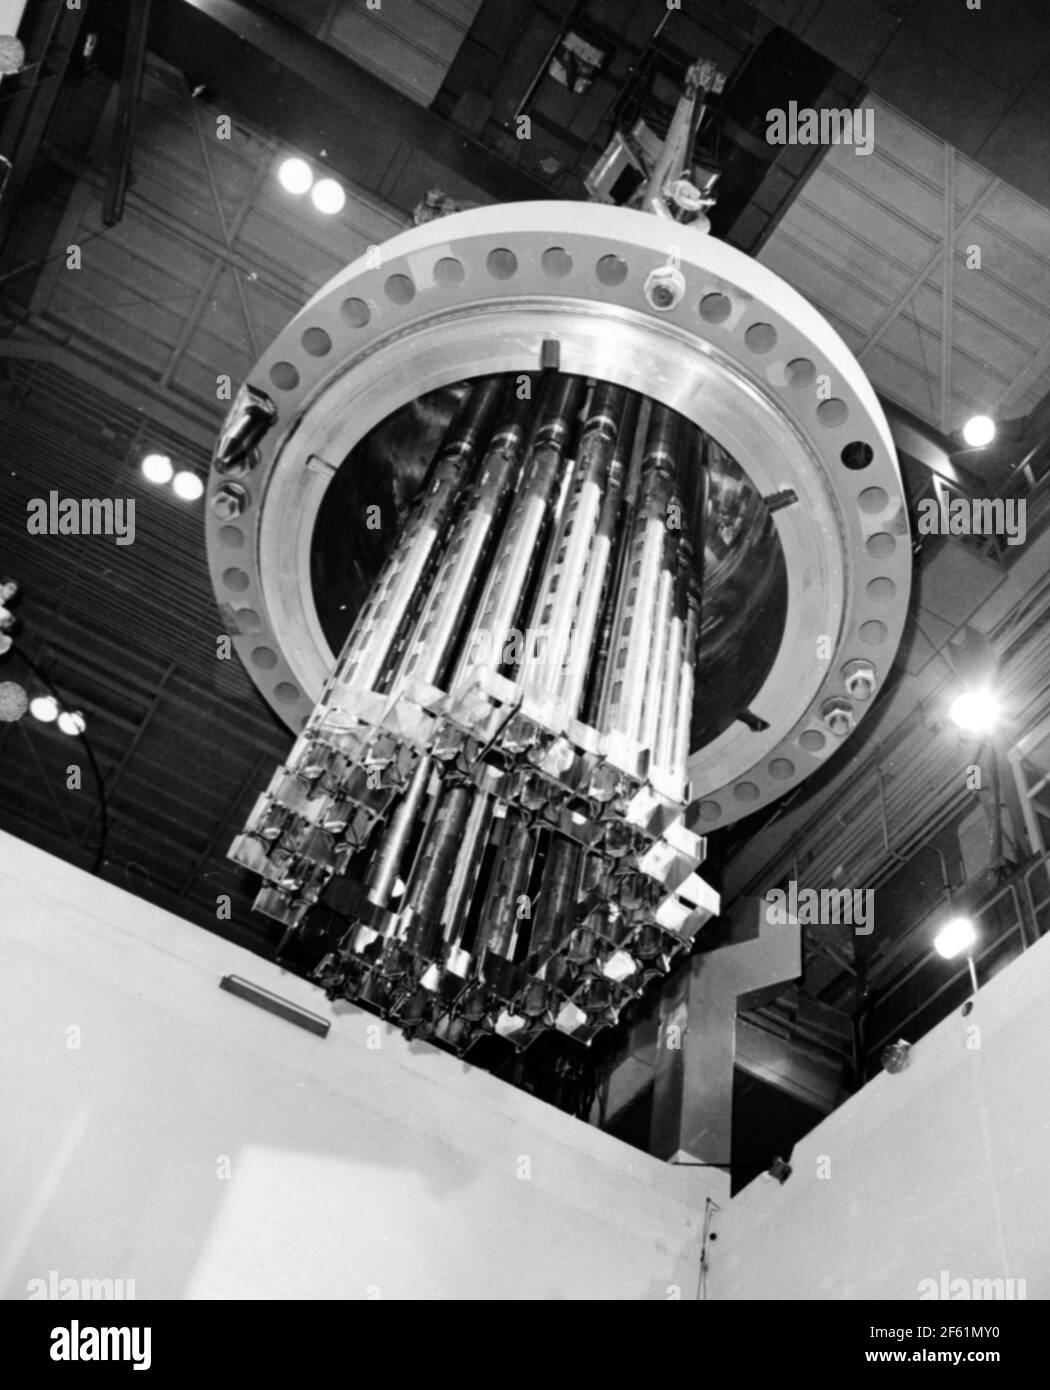 Assembling a Nuclear Reactor, 1964 Stock Photo